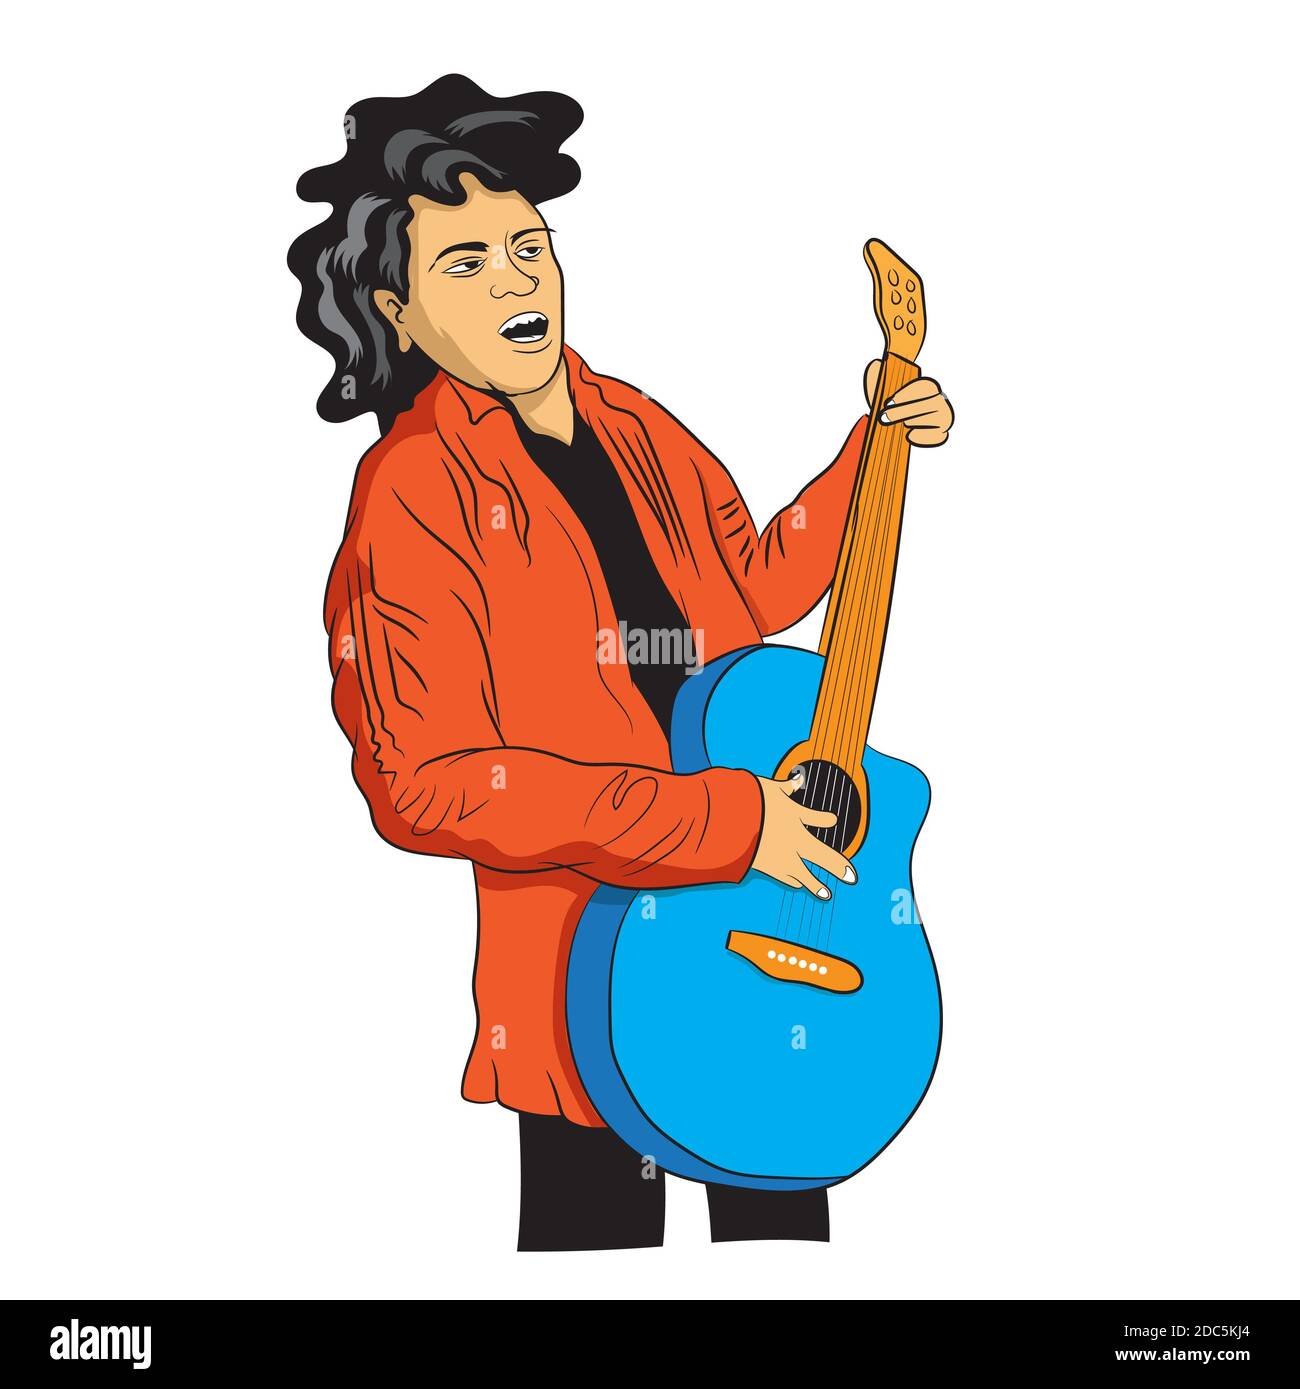 The man singing and playing acoustic guitar wearing jacket. Vector Illustrator. Stock Photo